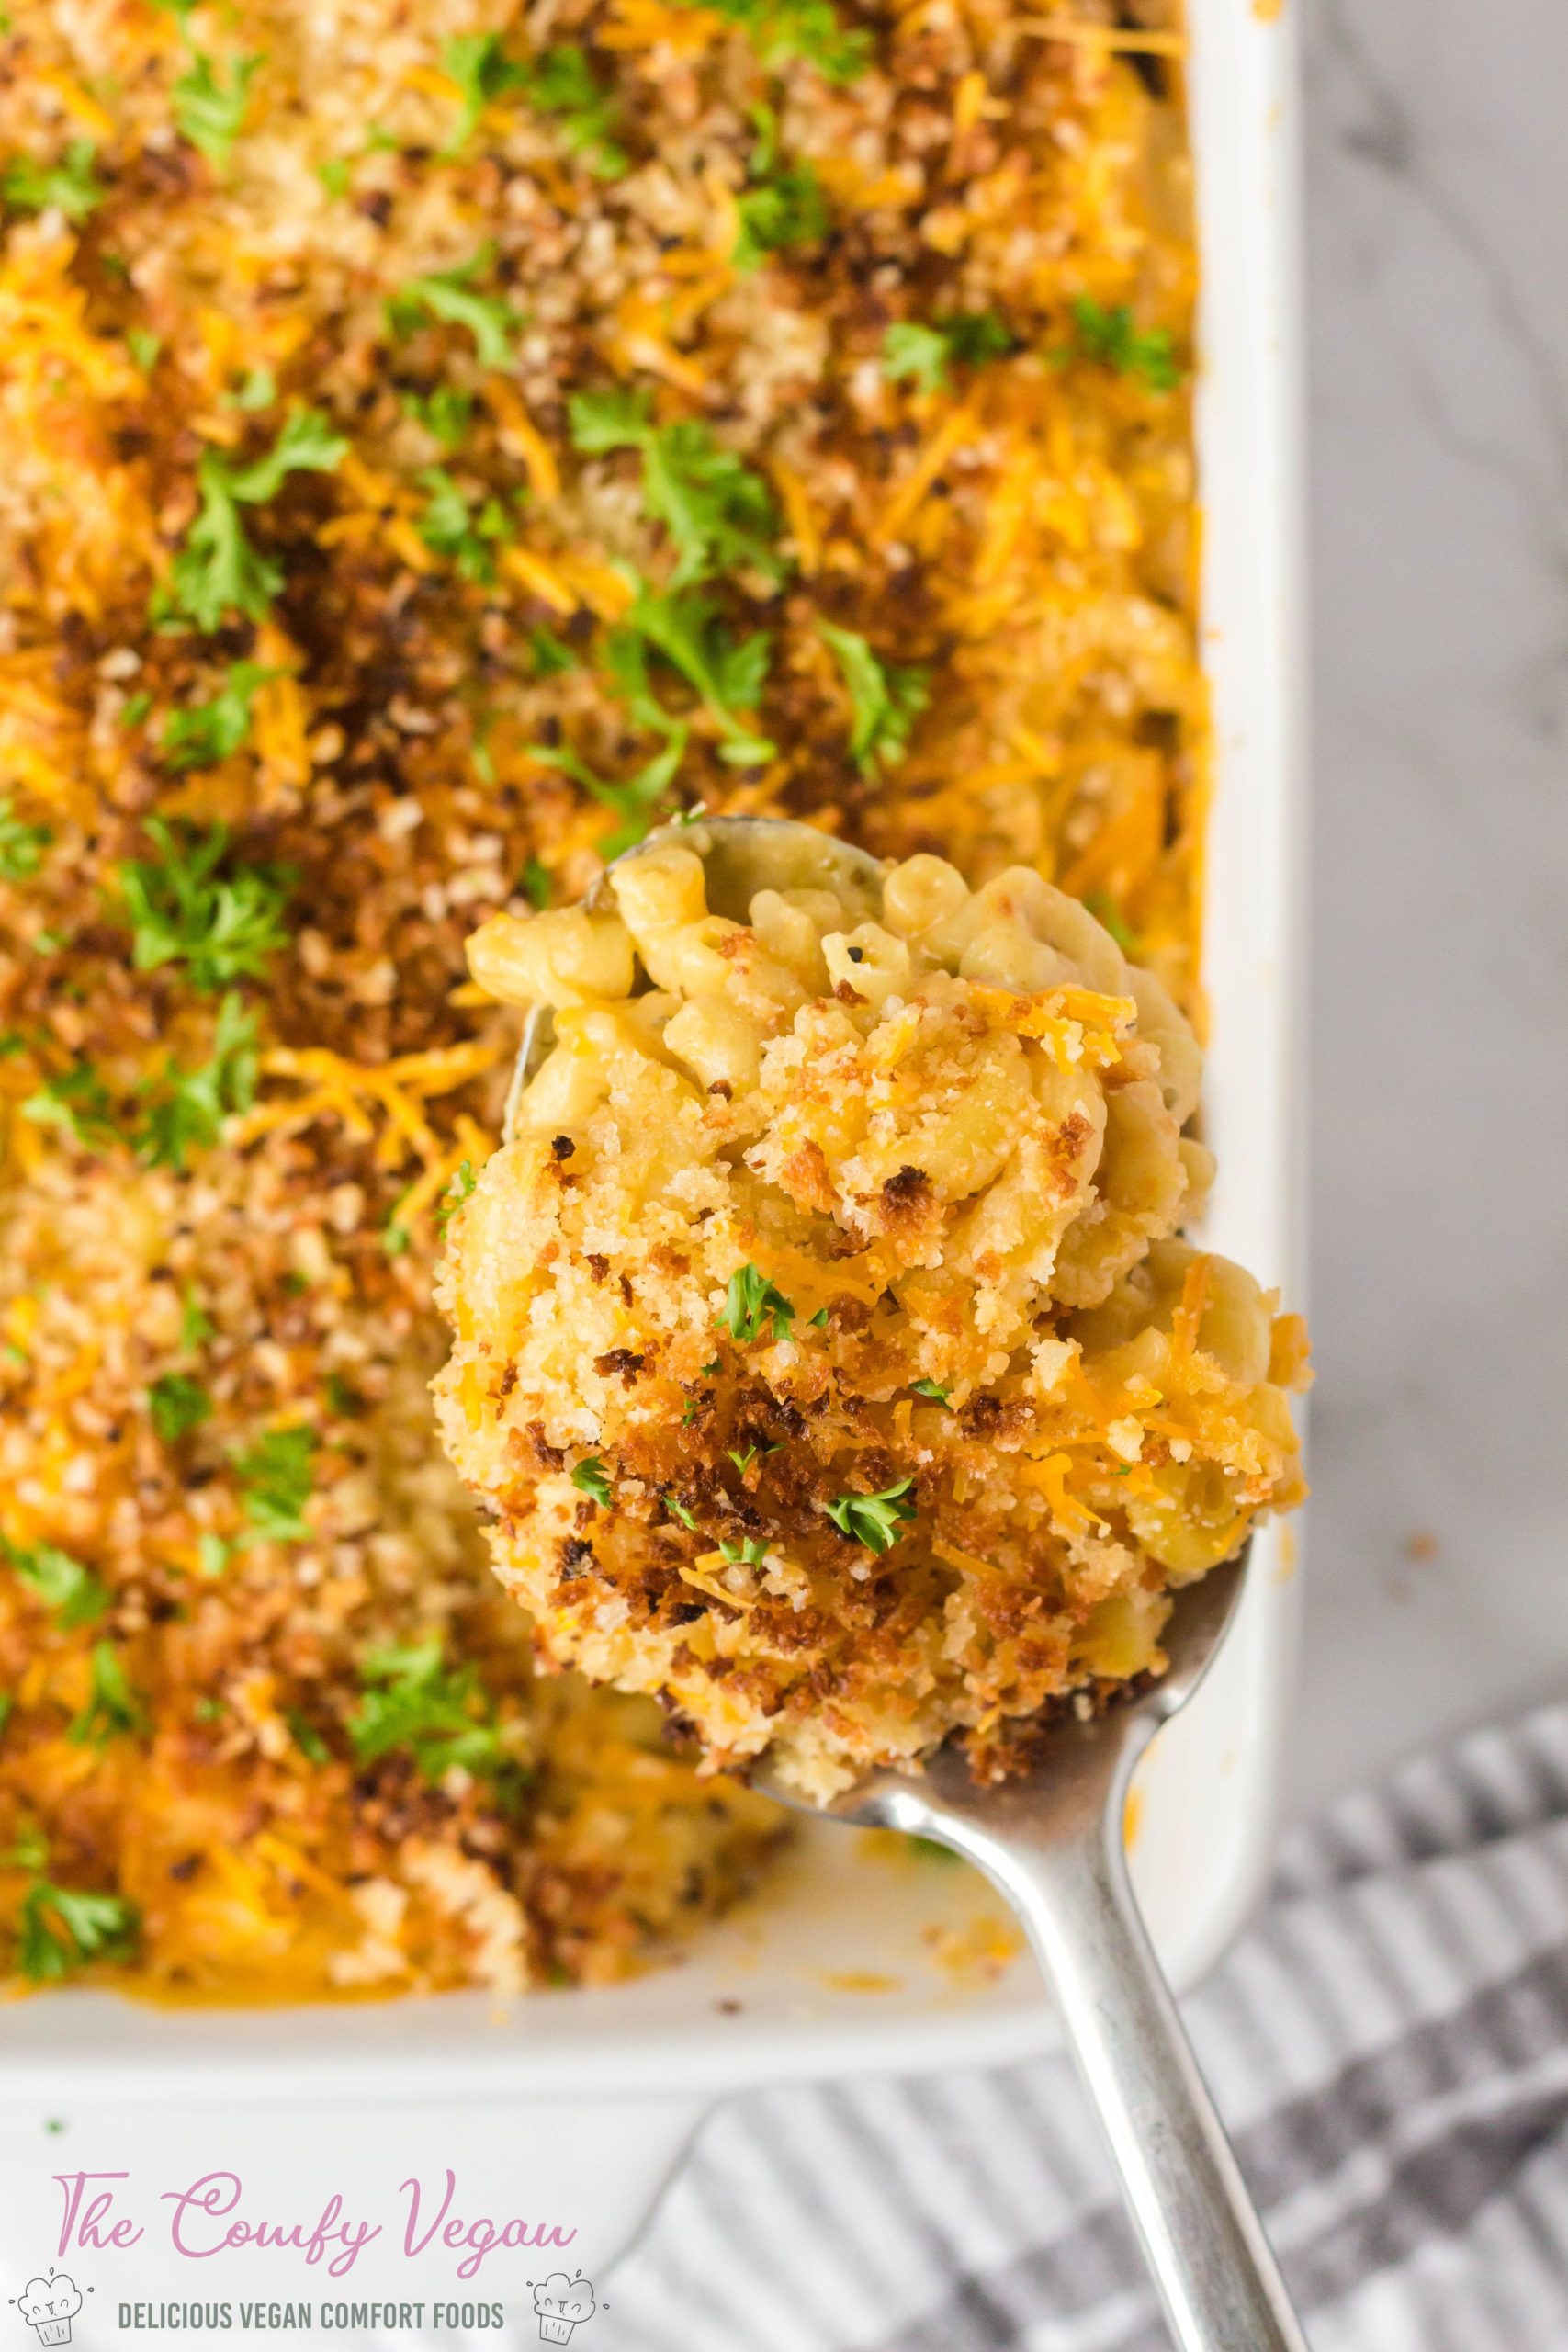 Vegan Baked Mac and Cheese is a classic comfort casserole turned vegan! It's cheesy, creamy, full of flavor, and ready to enjoy in just 30 minutes. This vegan mac and cheese is easy to make and a perfect weeknight dinner.